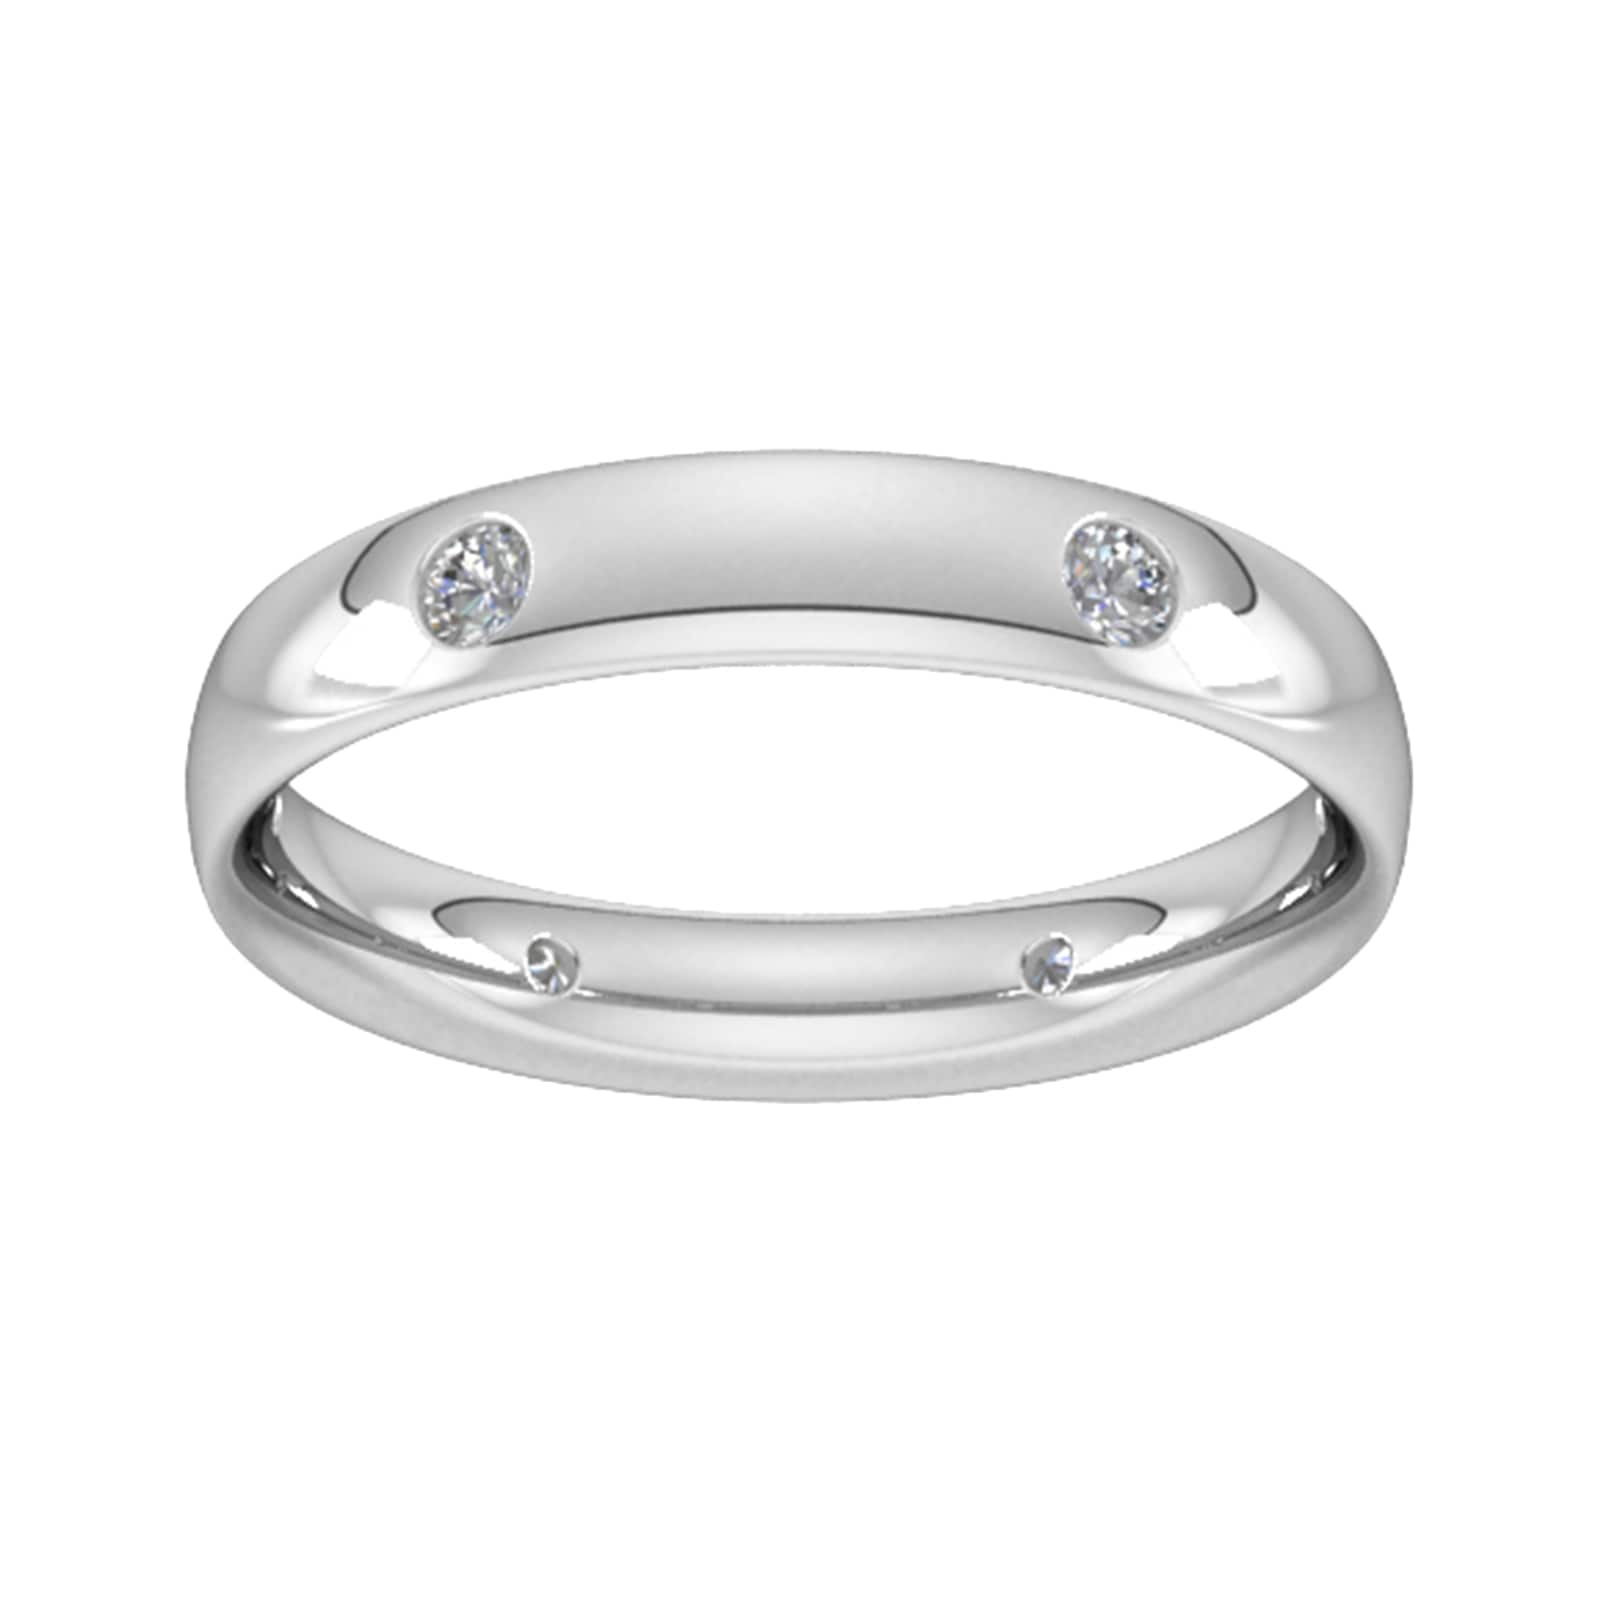 0.21 Carat Total Weight 6 Stone Brilliant Cut Rub Over Diamond Set Wedding Ring In 9 Carat White Gold - Ring Size R